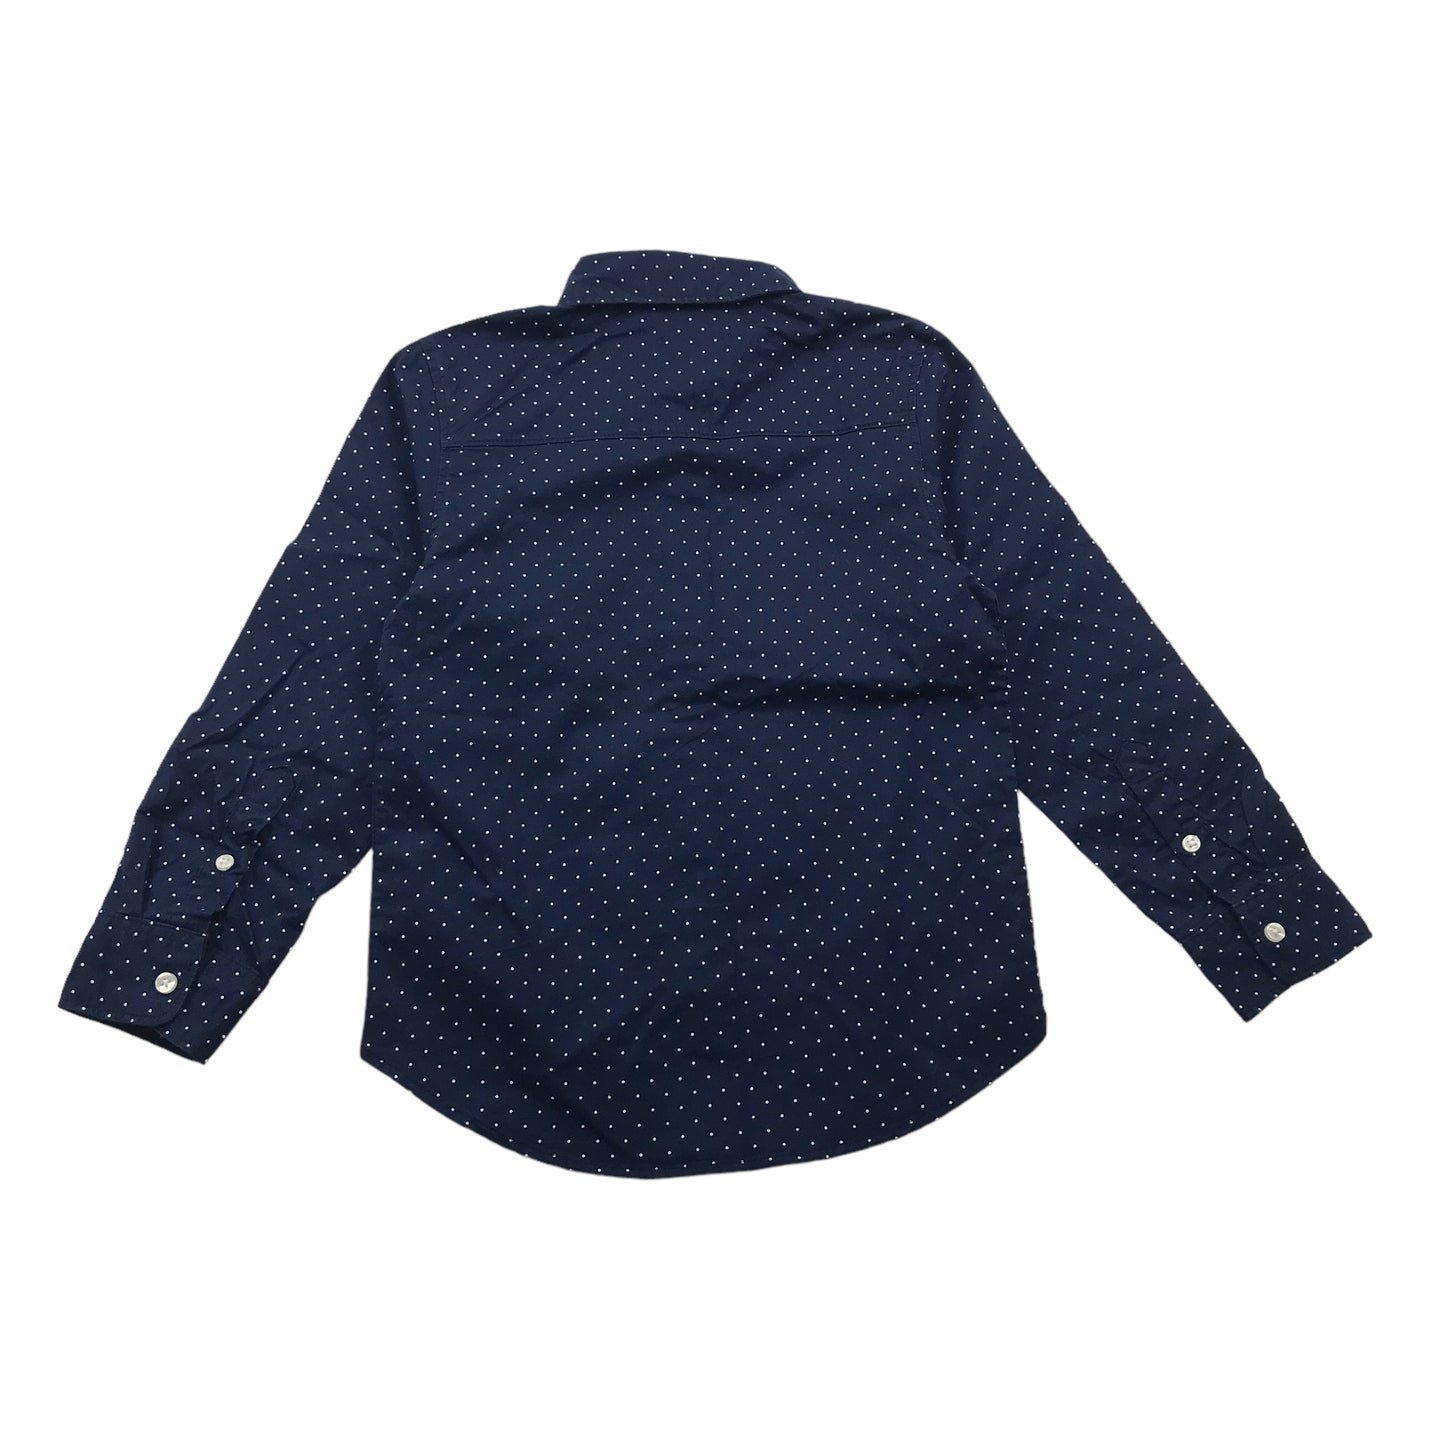 H&M Navy Blue Dotted Long Sleeve Cotton Shirt Age 5